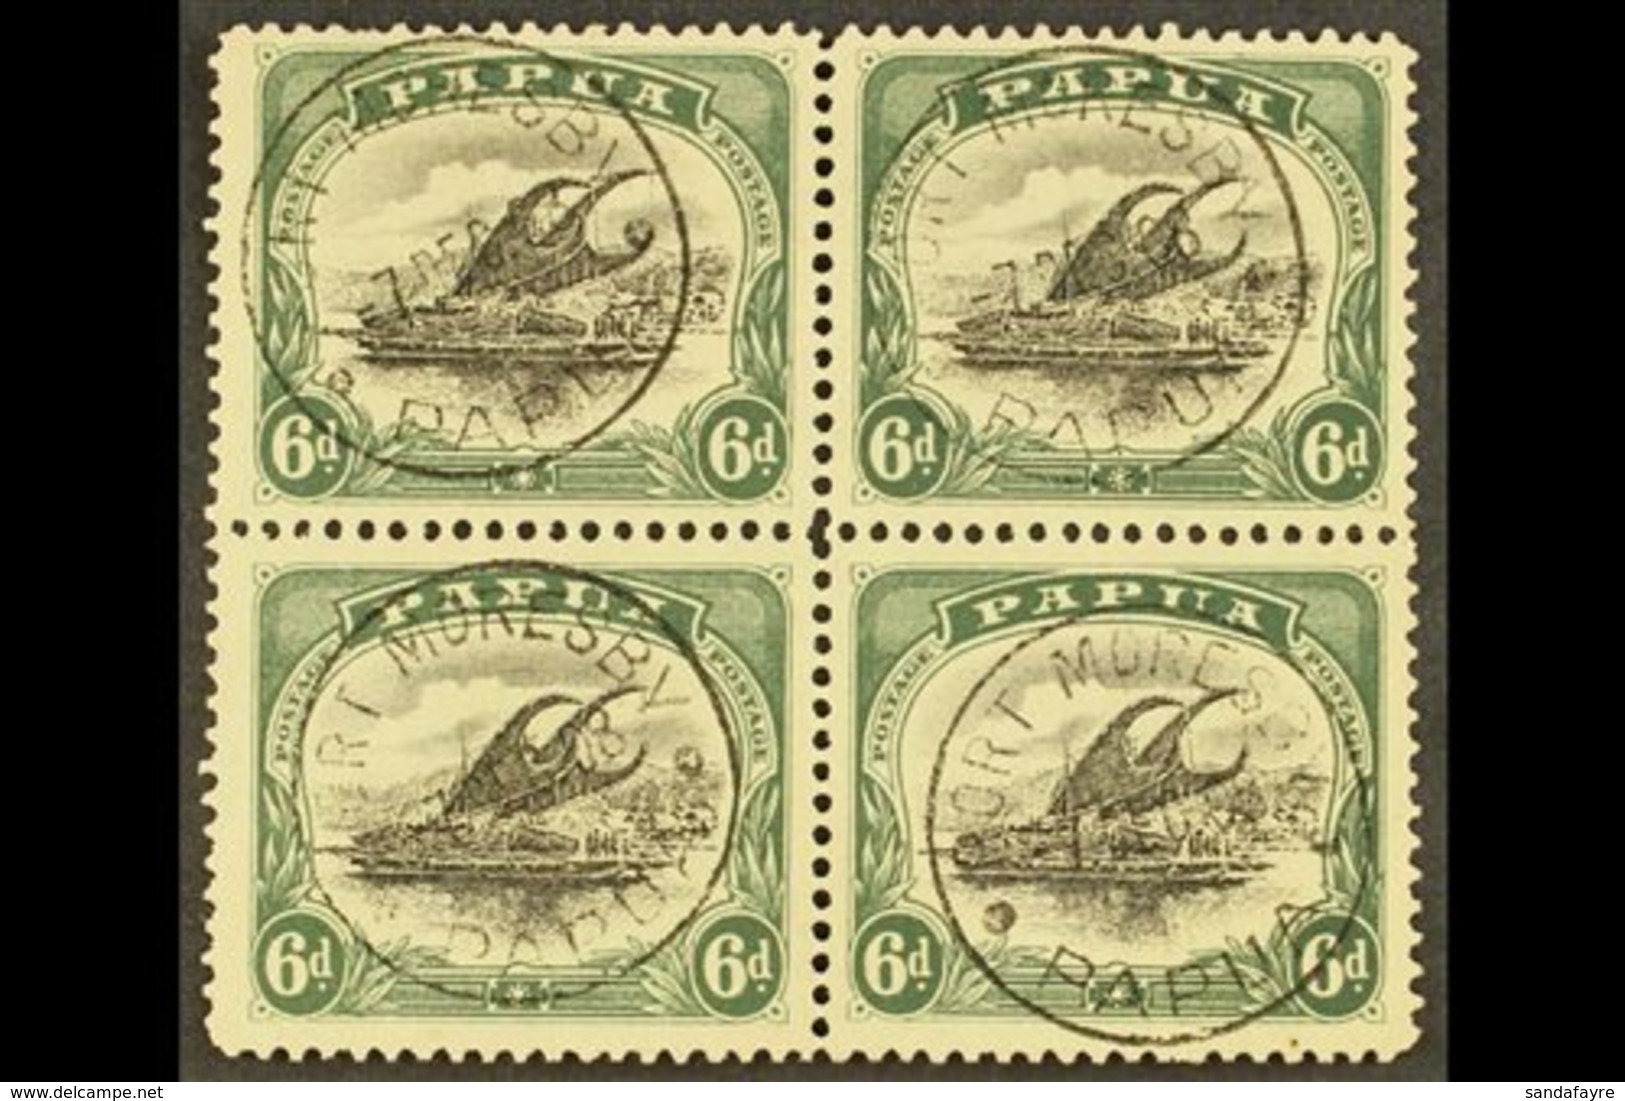 1907-98 Small Papua, Watermark Upright Perf 11 6d Black And Myrtle Green, SG 53, Superb Cds Used Block Of Four, Port Mor - Papua Nuova Guinea